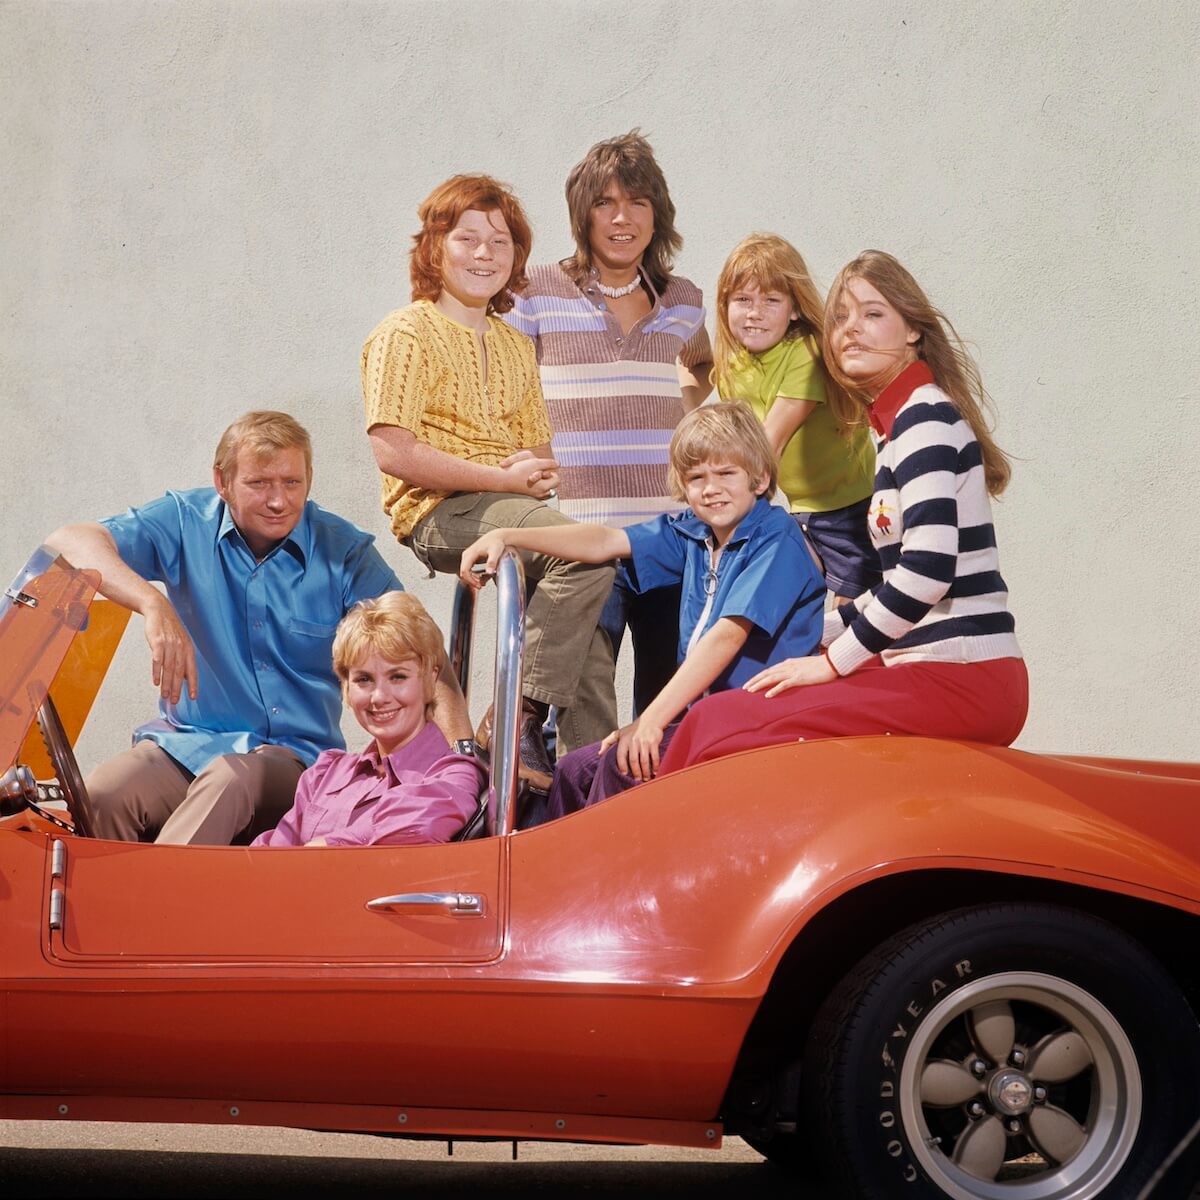 The cast of 'The Partridge Family sitting n a red Corvette